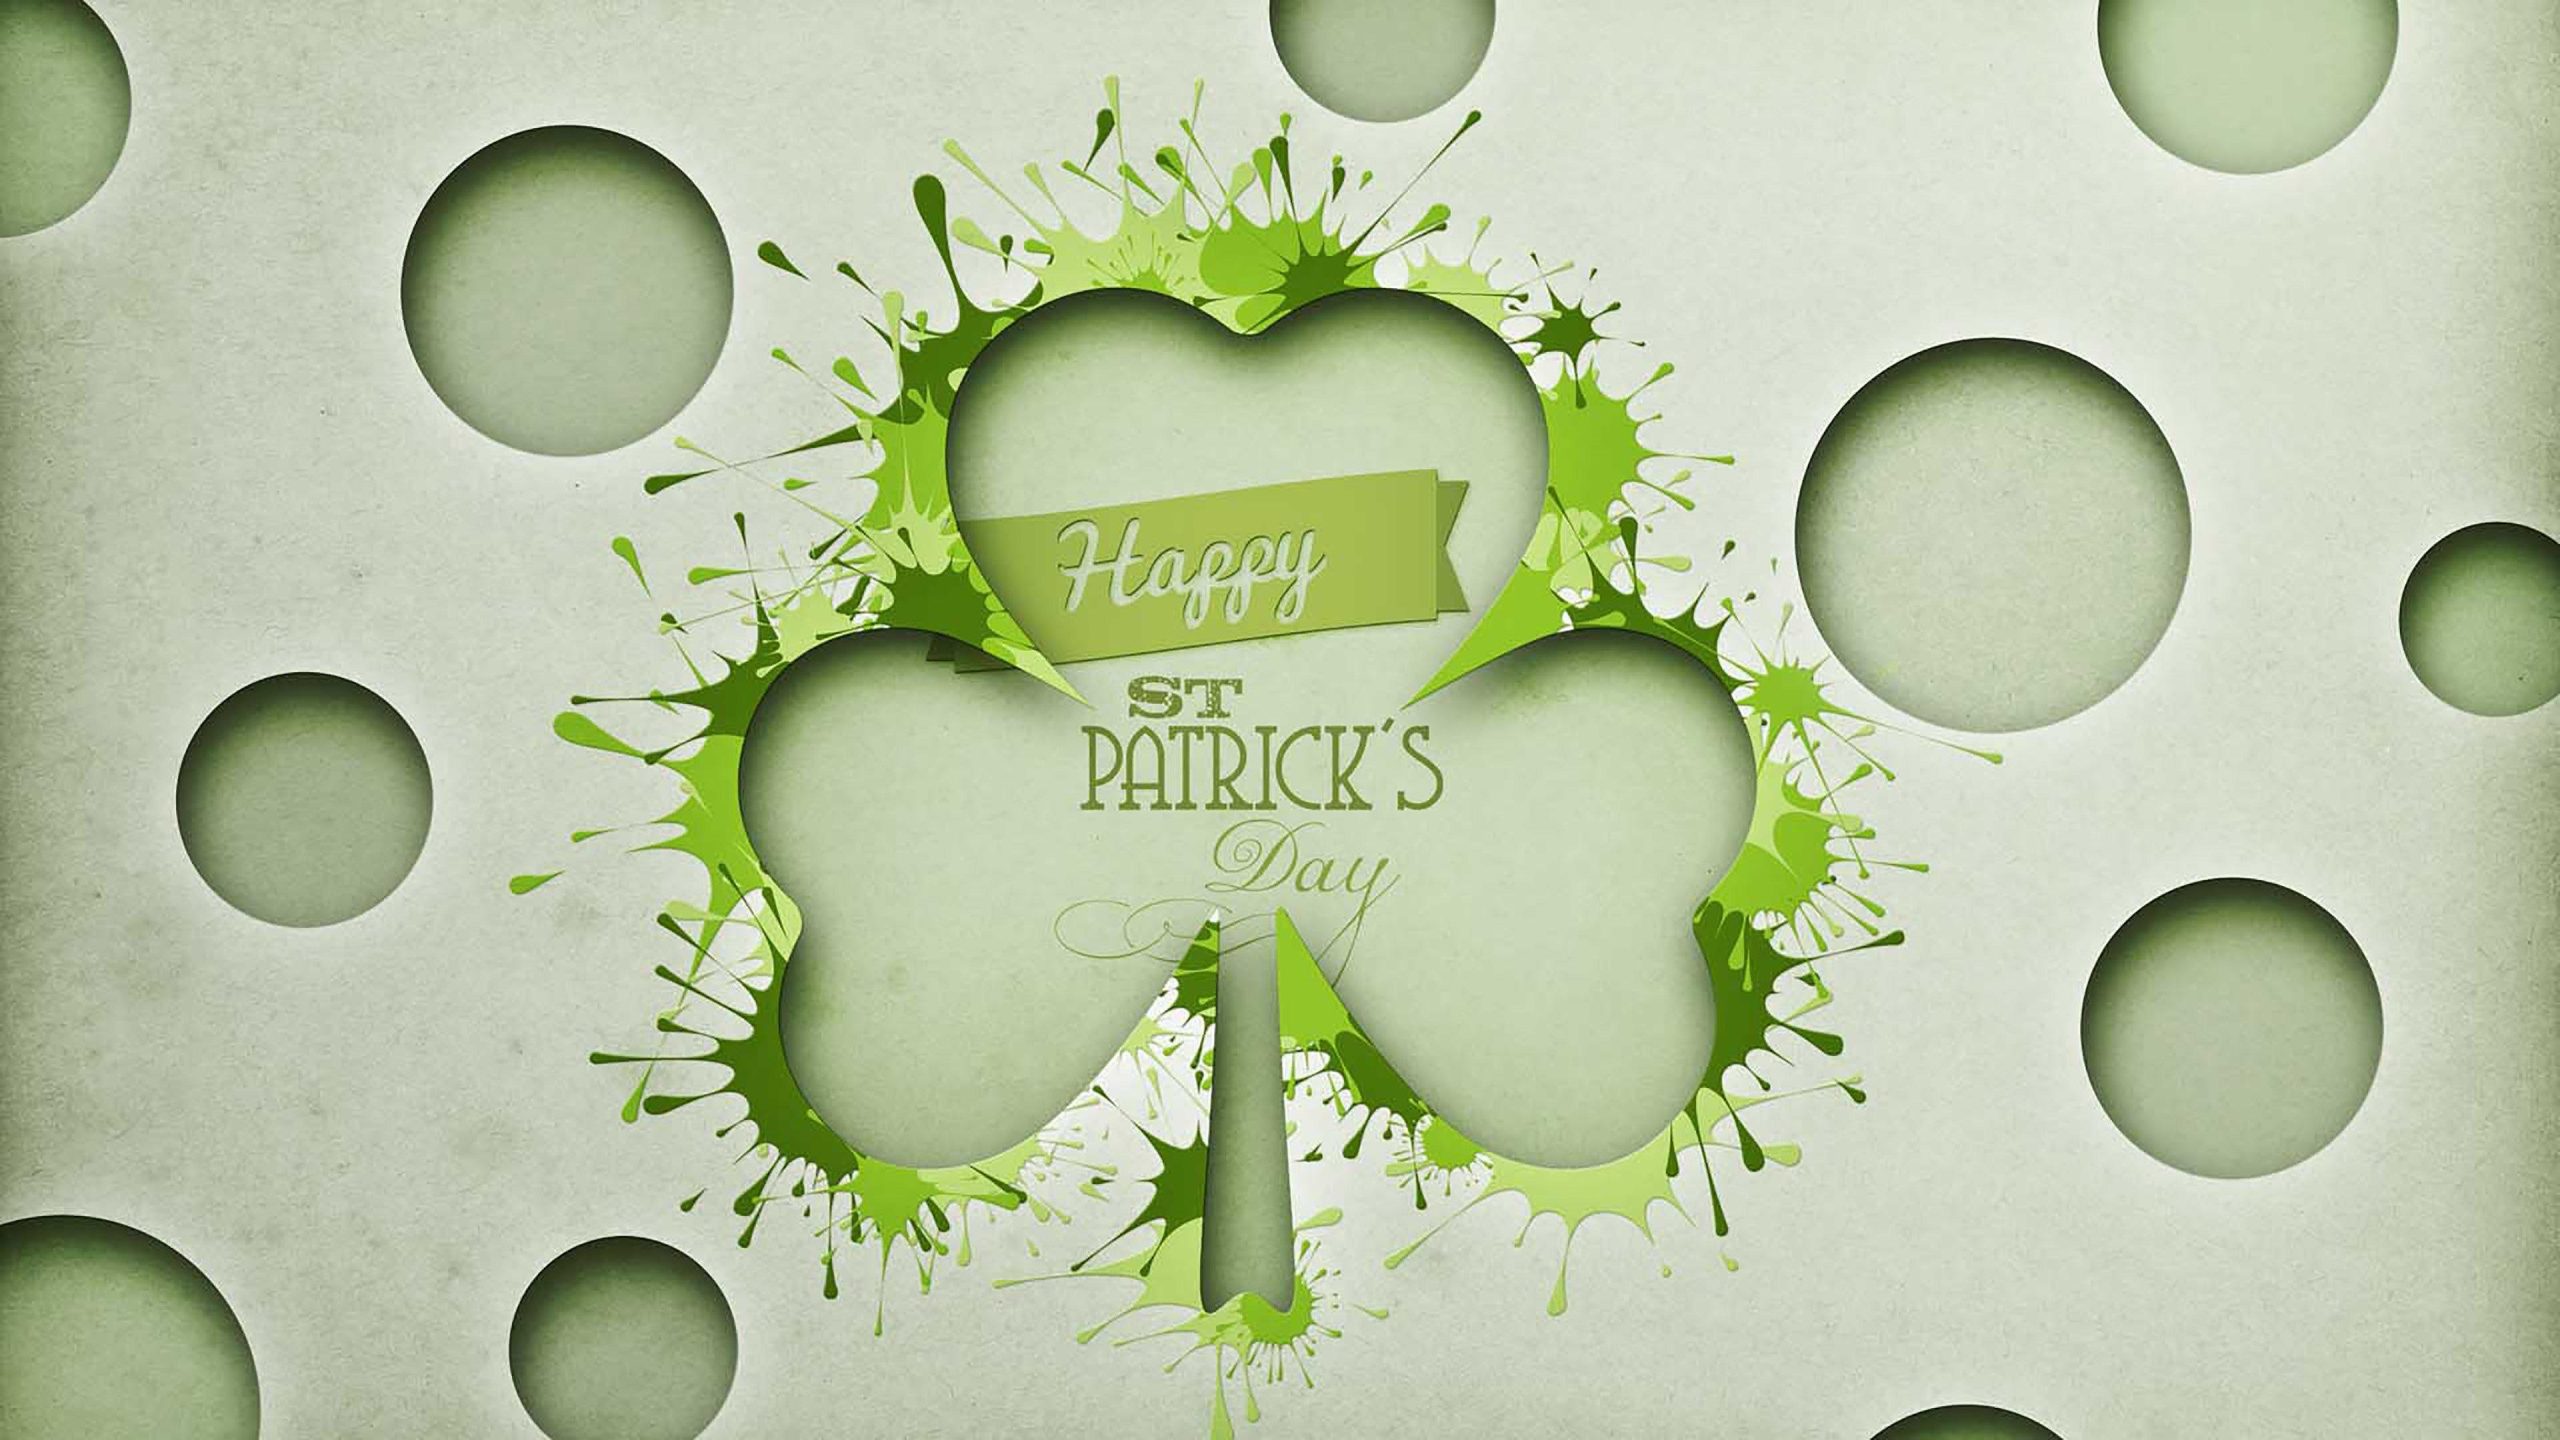 Saint Patricks Day Computer Wallpapers For Free, Saint Patricks Day Computer, Anime